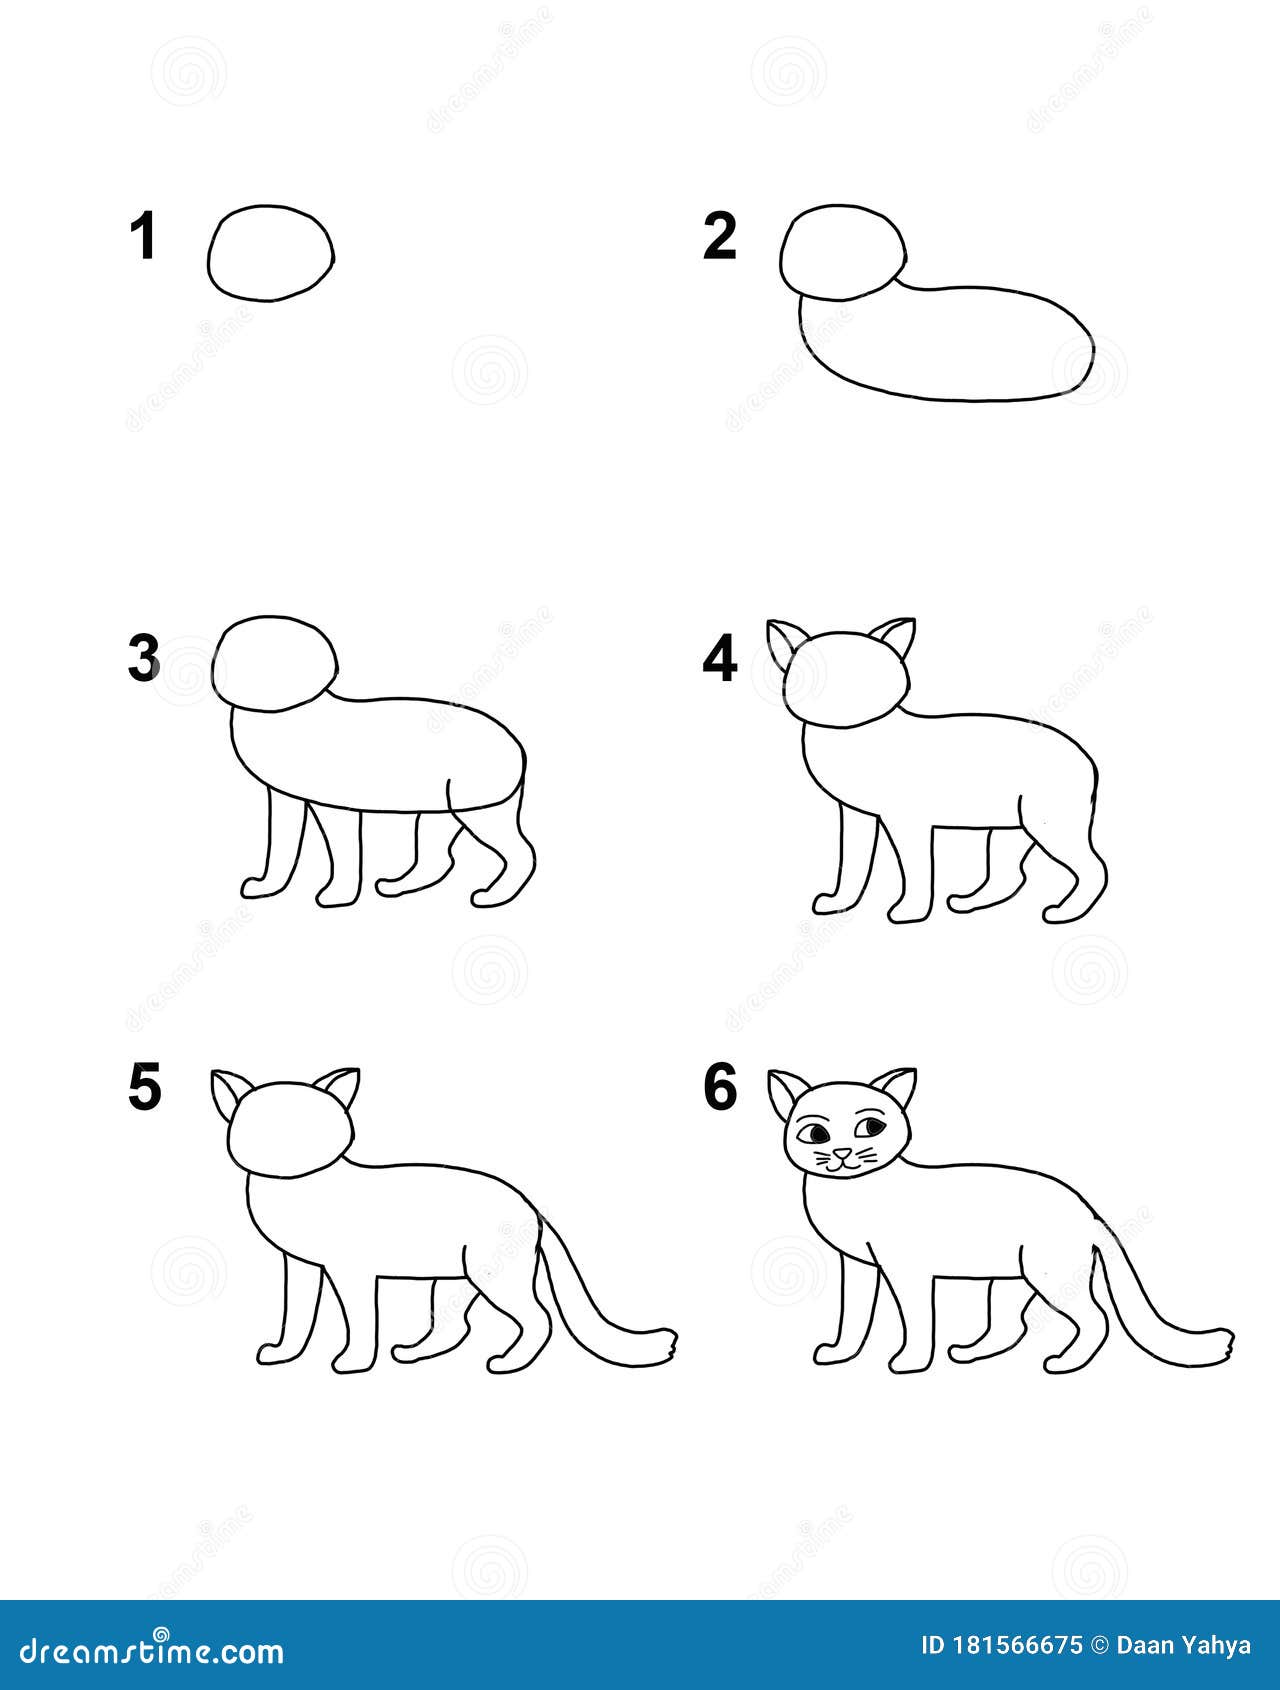 How To Draw Cat Step By Step Cartoon Illustration With